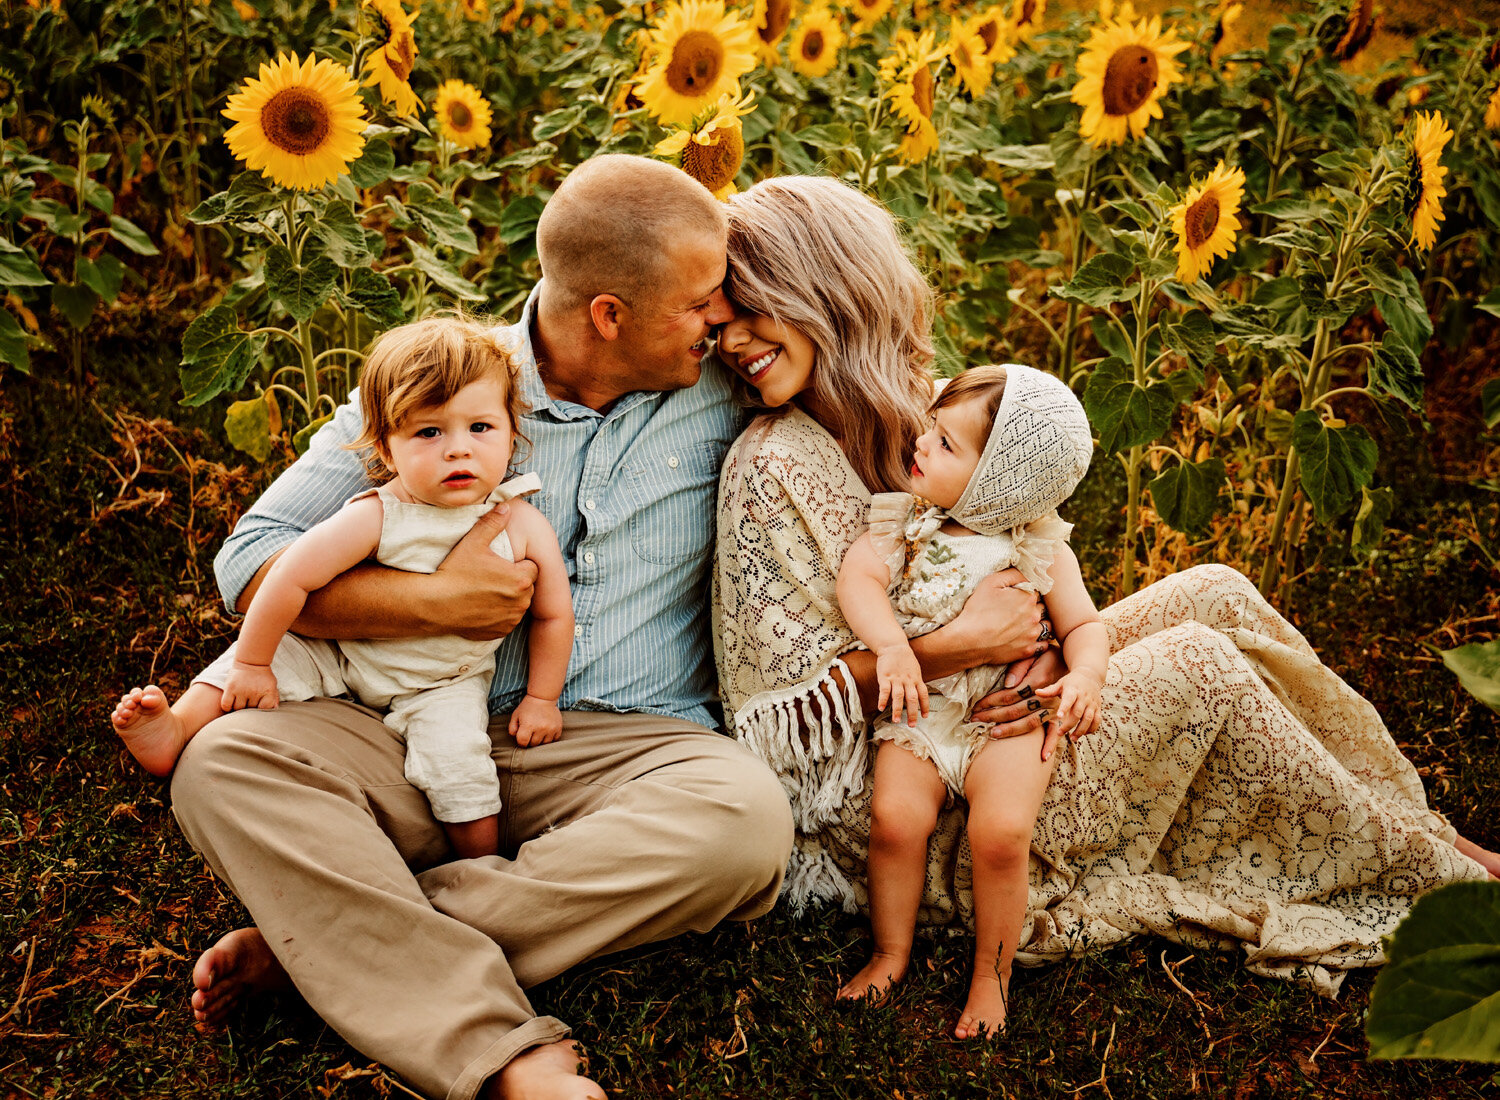  Beautiful family photo session in s big sunflower field. Young family with twins in boho outfits and flutter dress by ramstein kmc family photographer sarah havens 